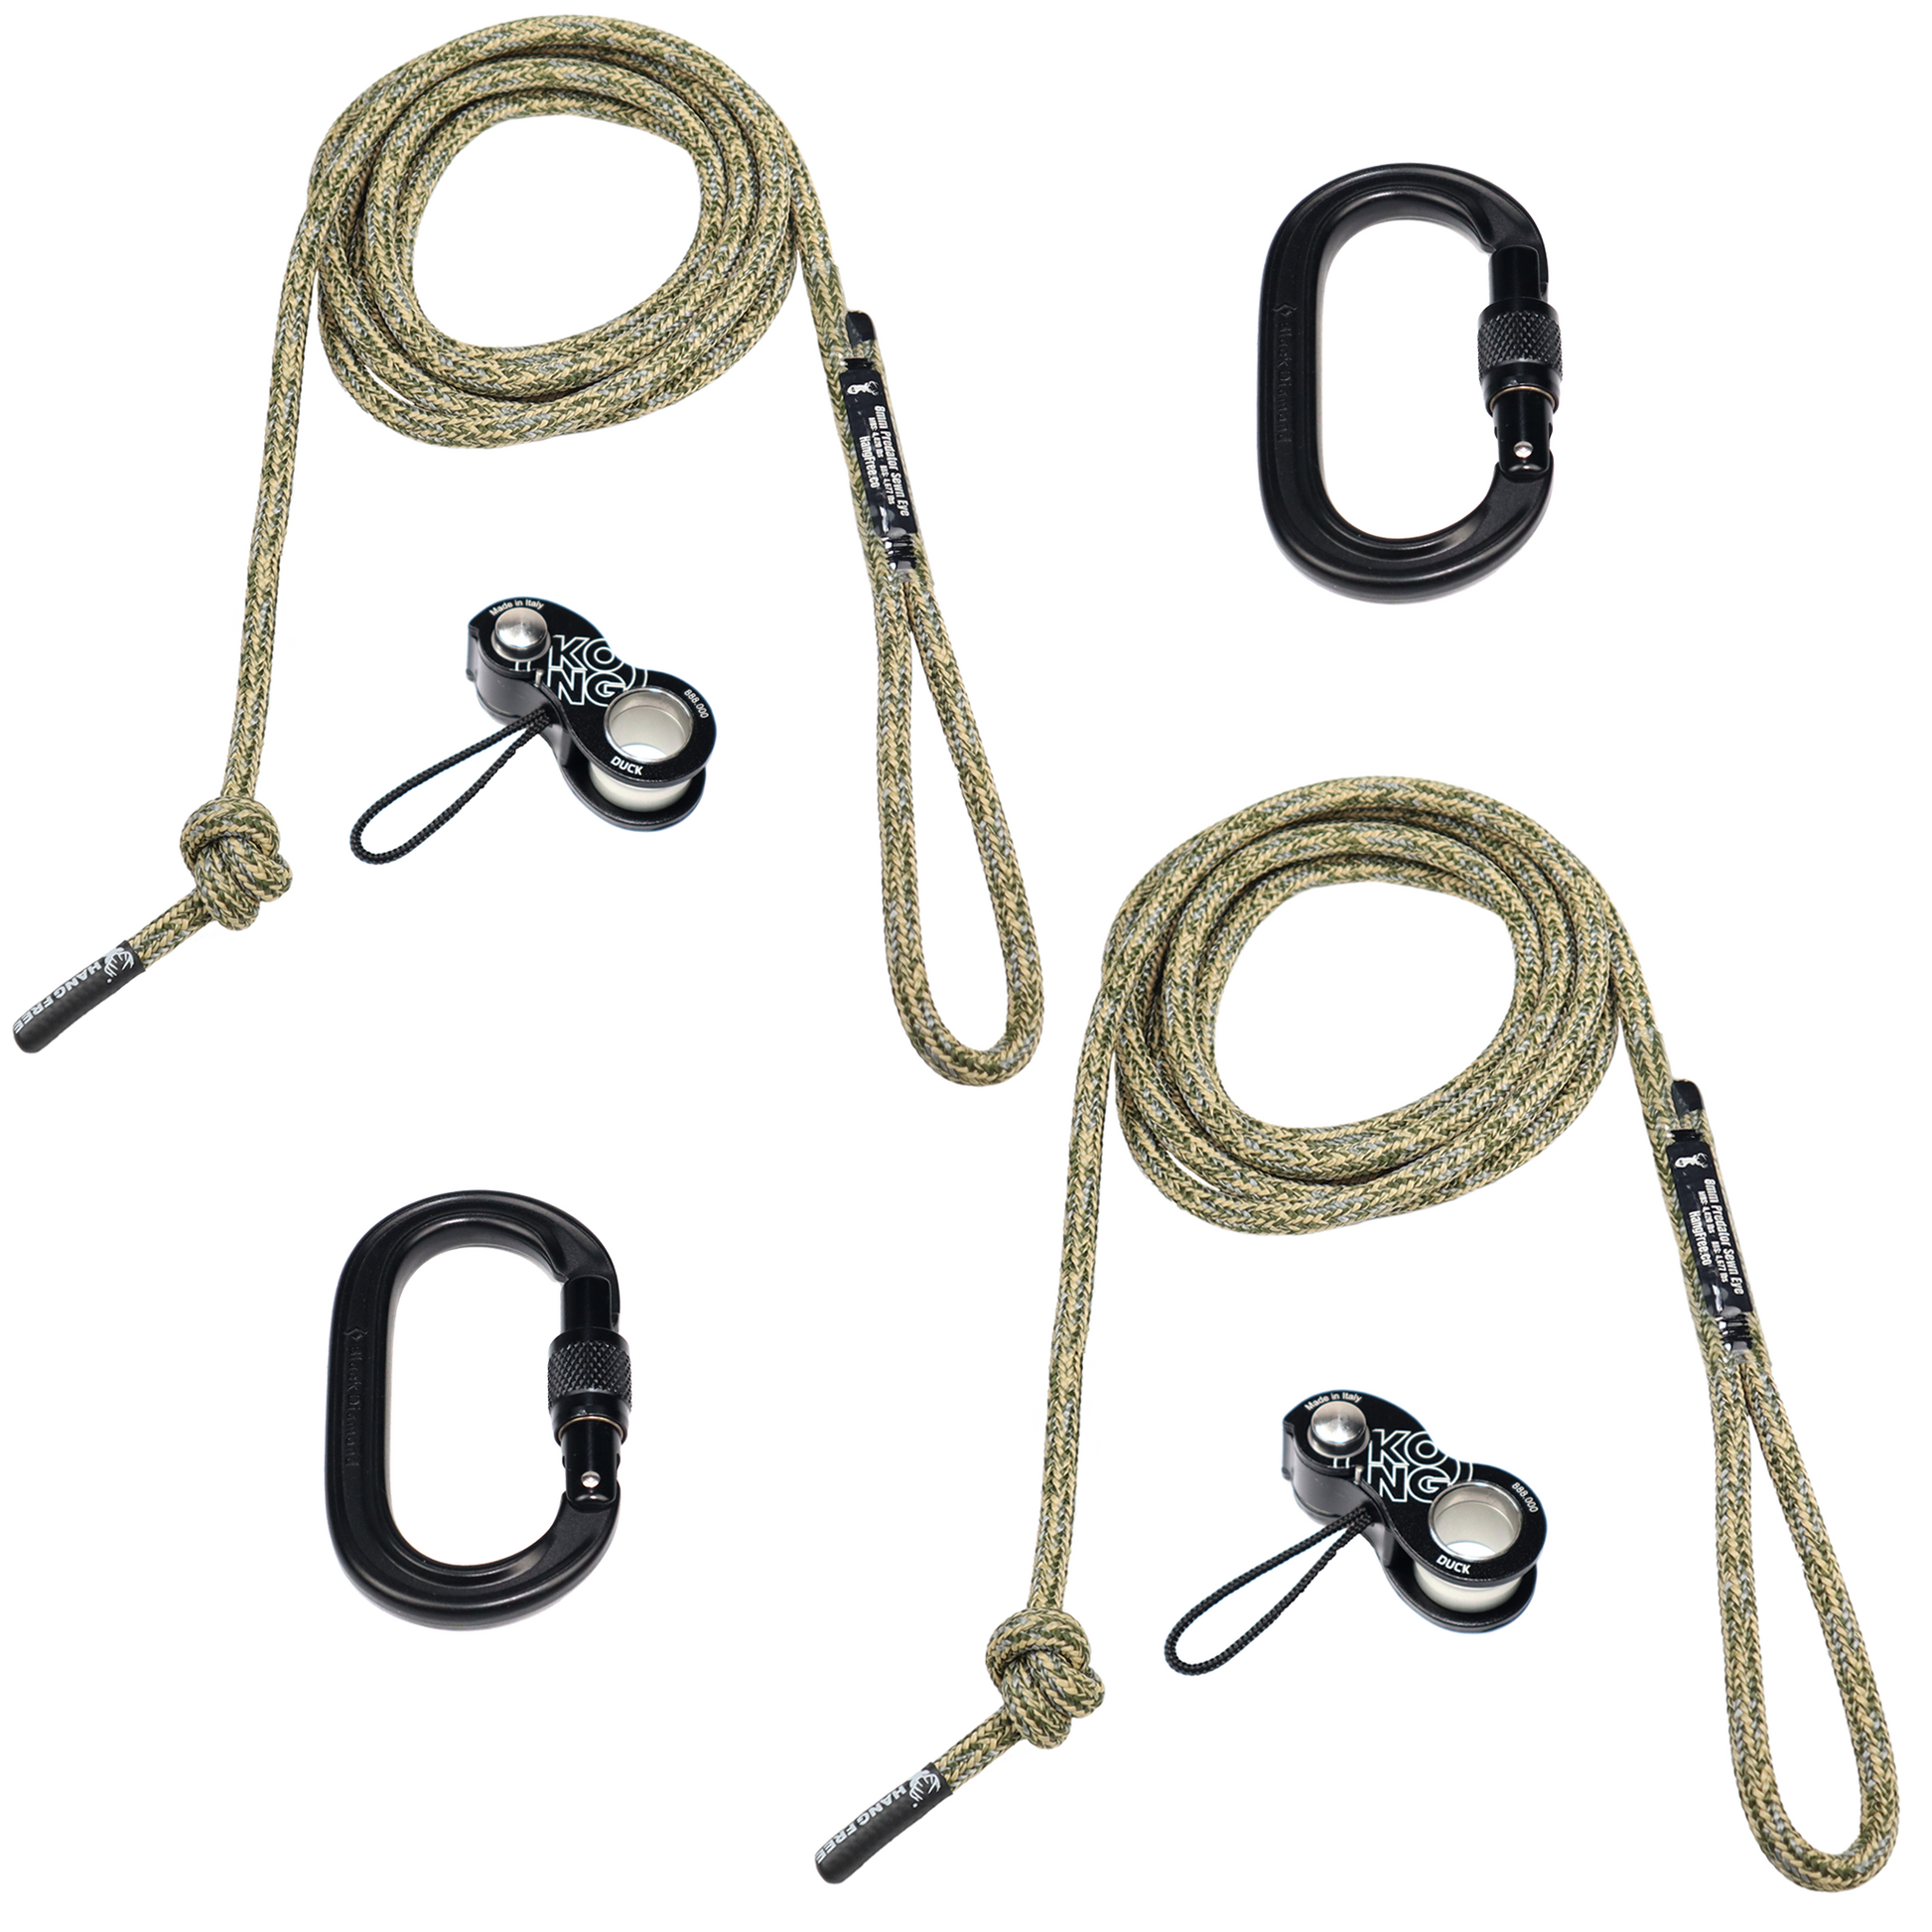 Deluxe Predator Tether and Lineman's Package with Kong Ducks and Carabiners in Desert Camo